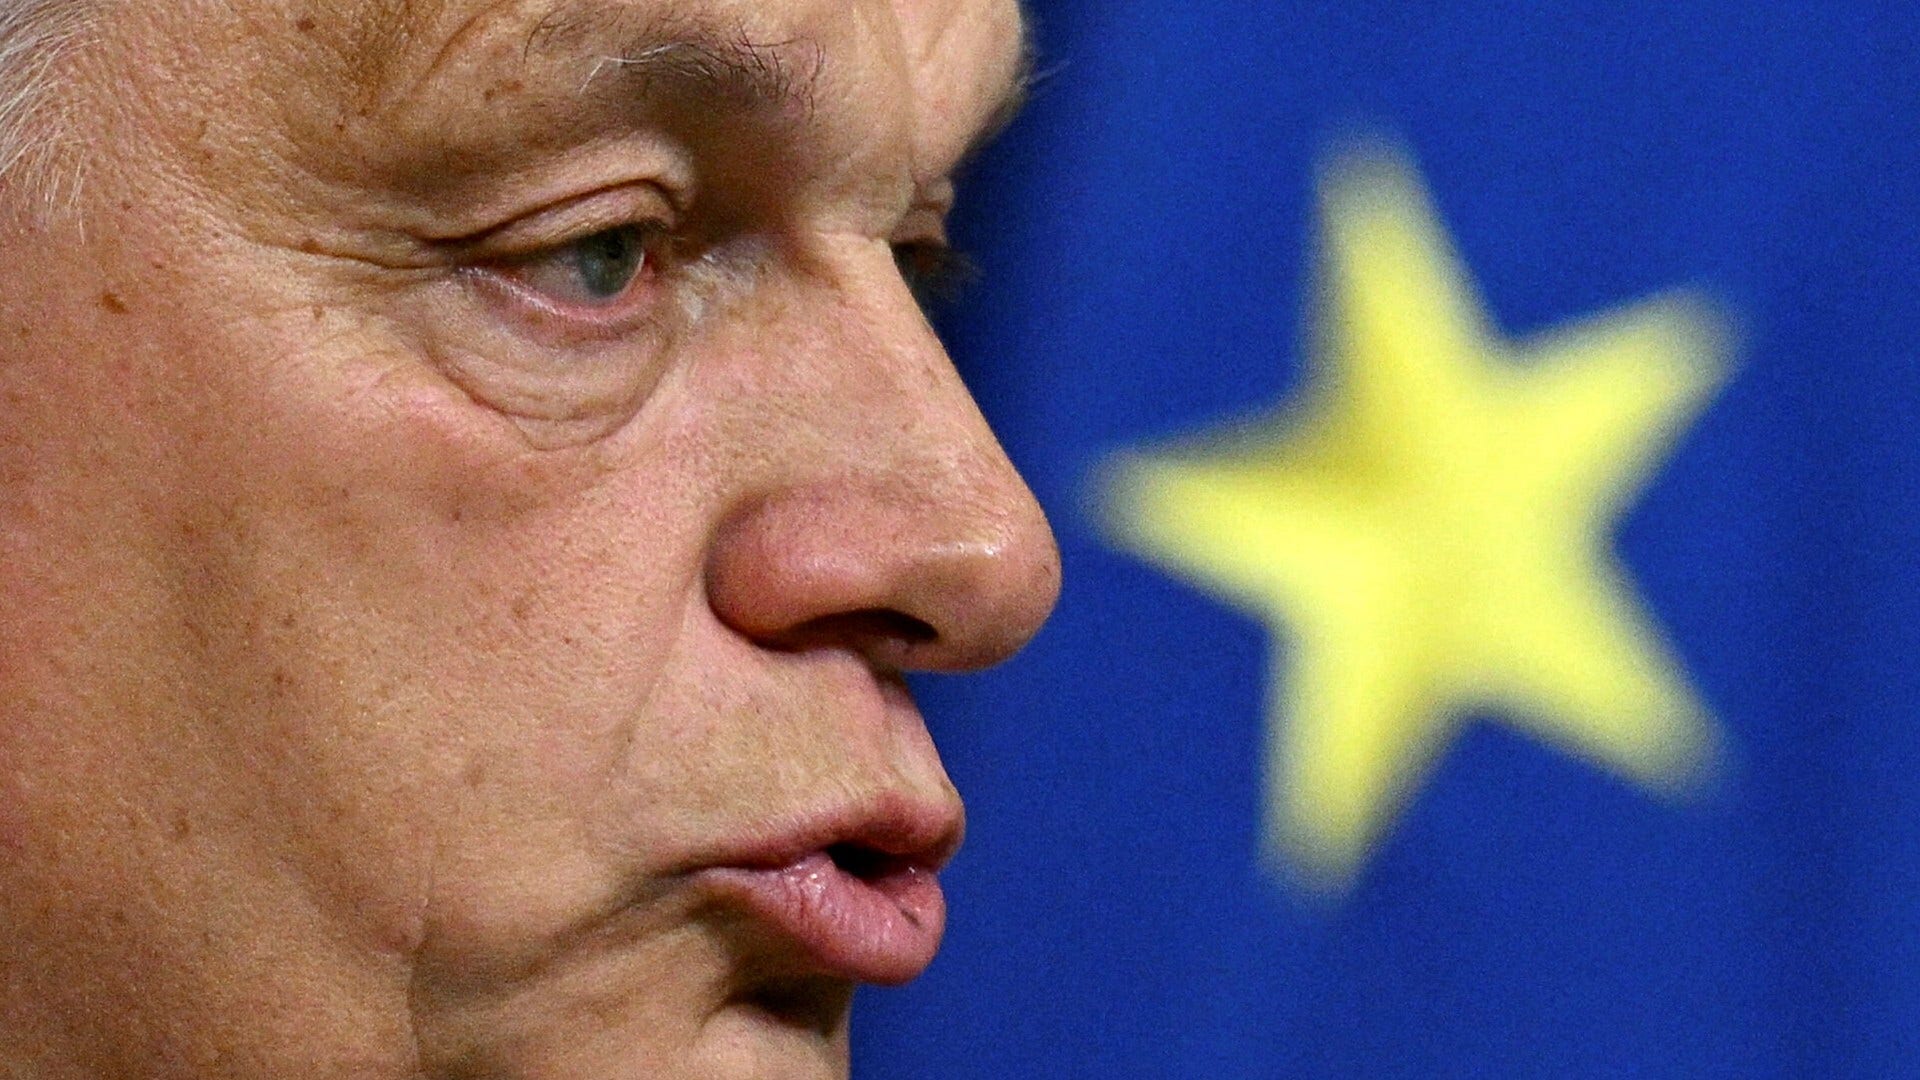 Hungary, Europe's troublemaker, takes over the presidency of the European Union.